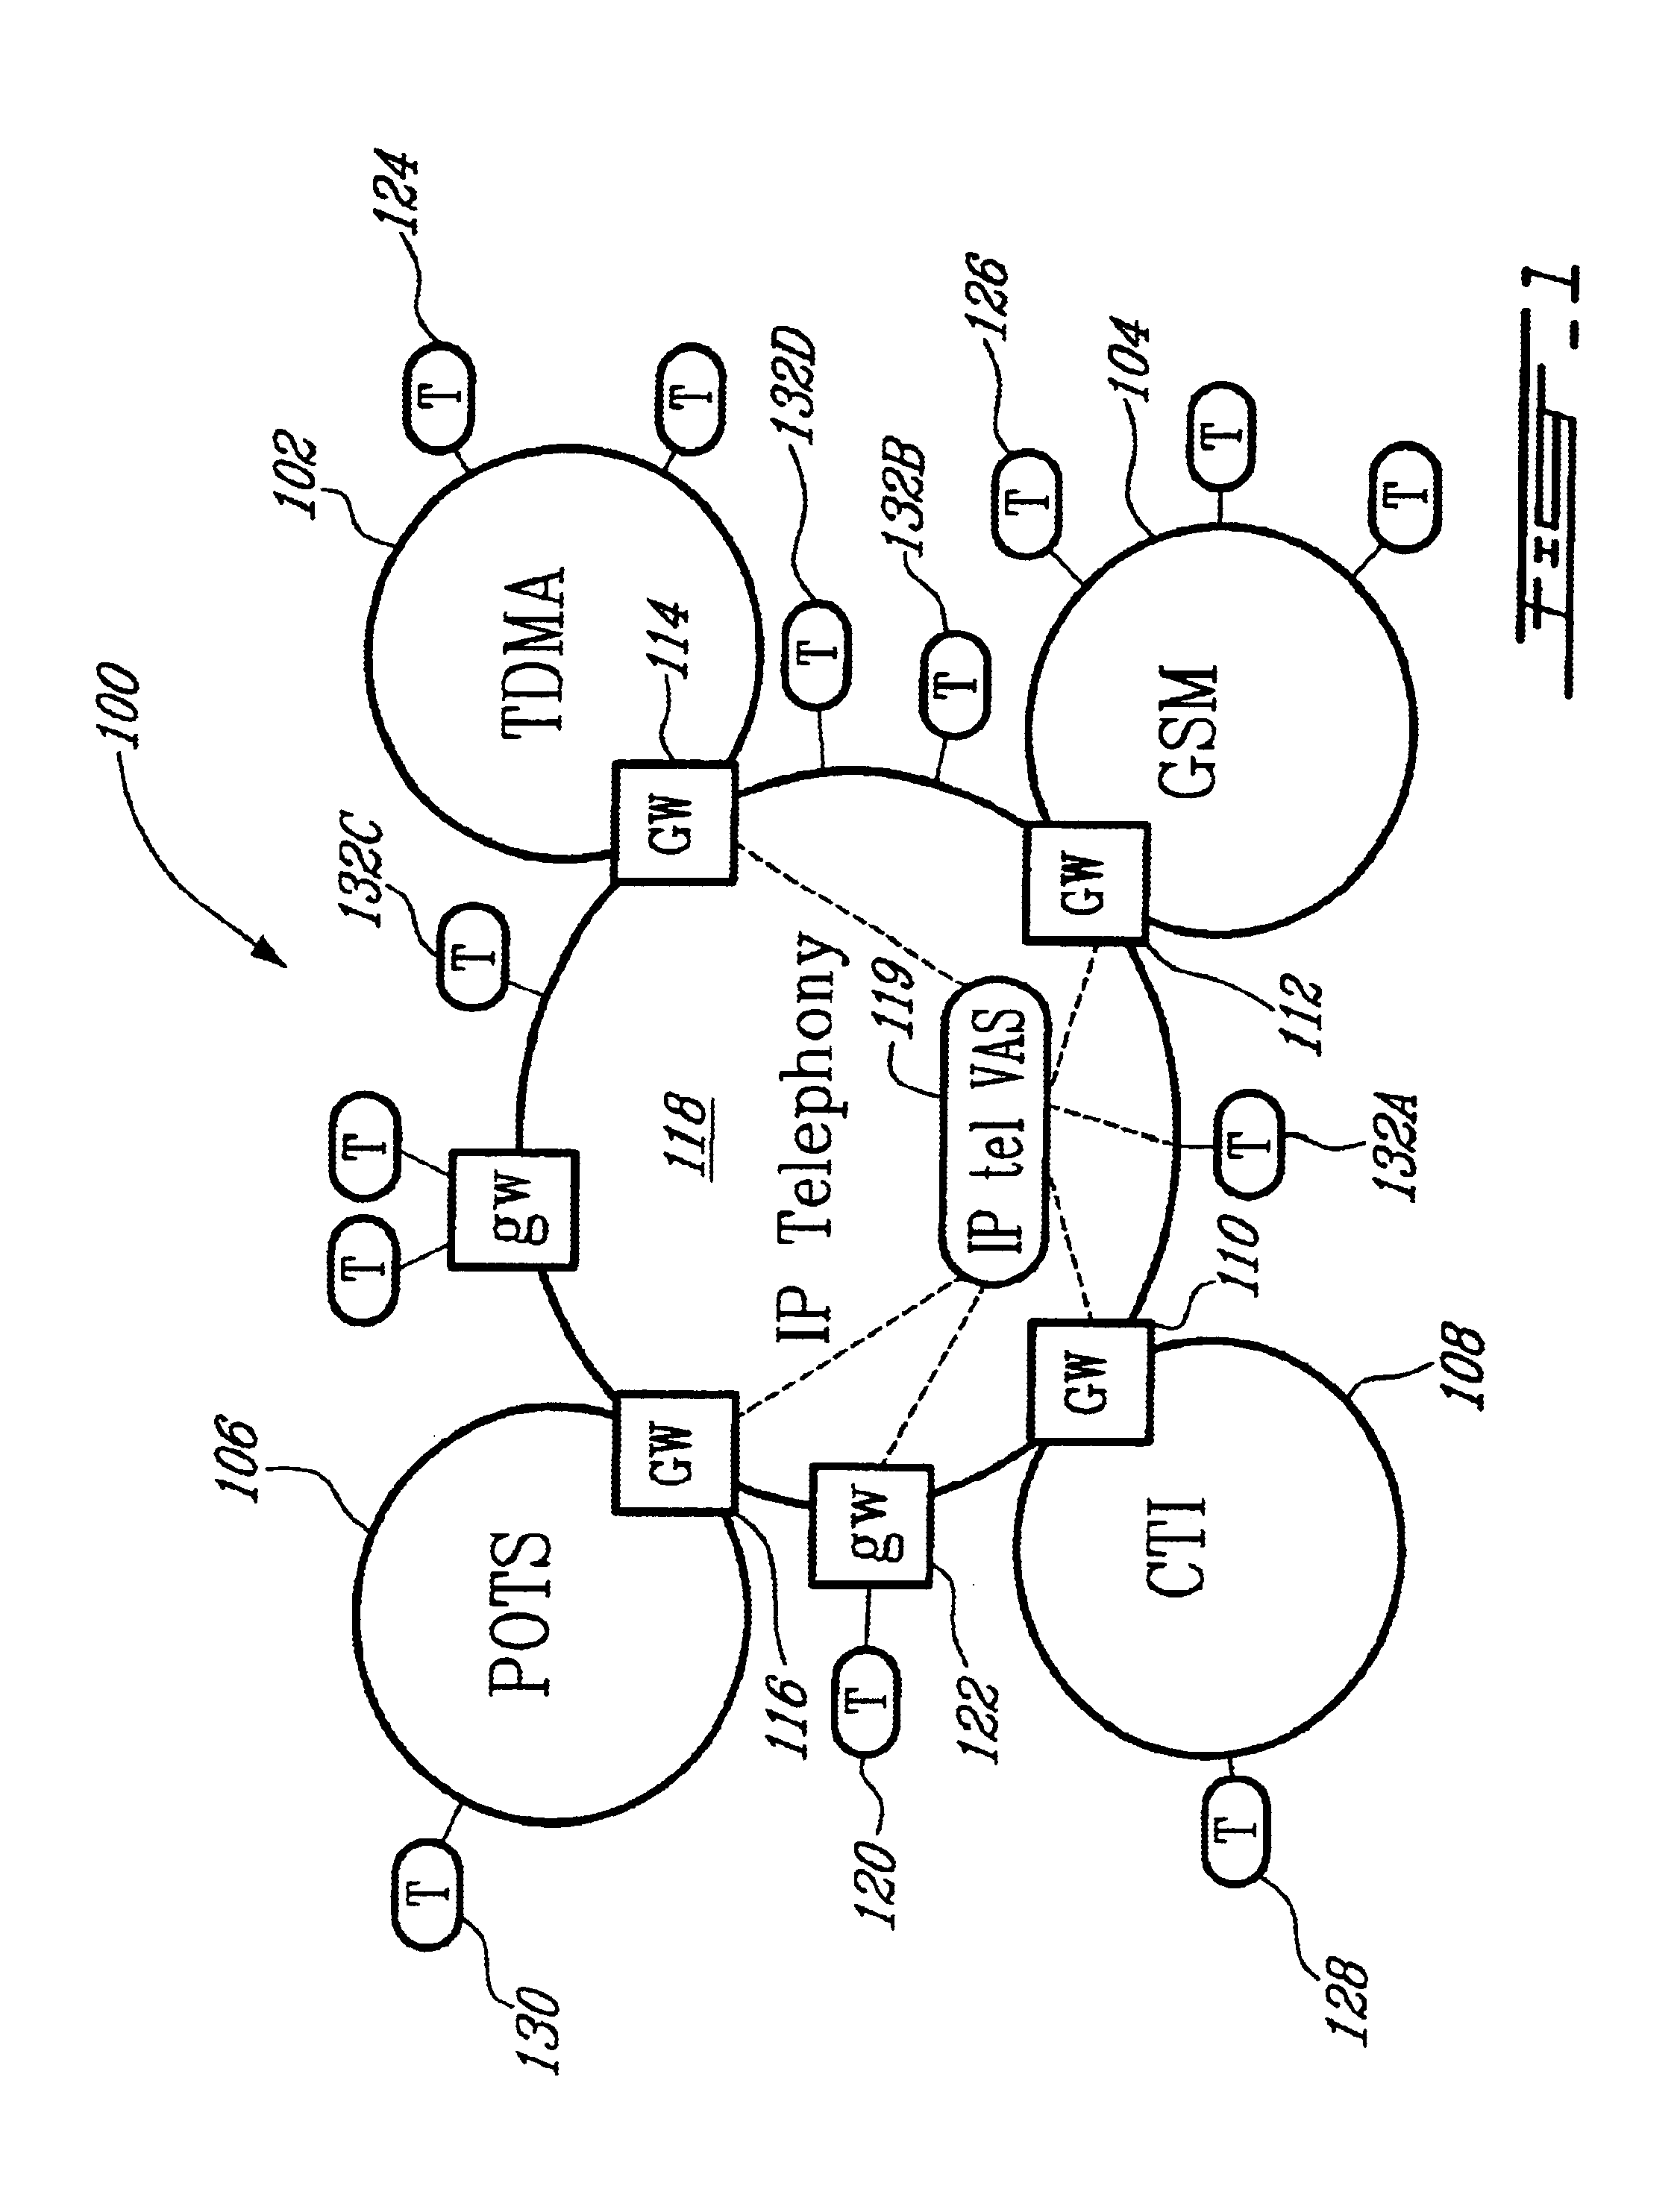 System and method for providing device-aware services in an integrated telecommunications network